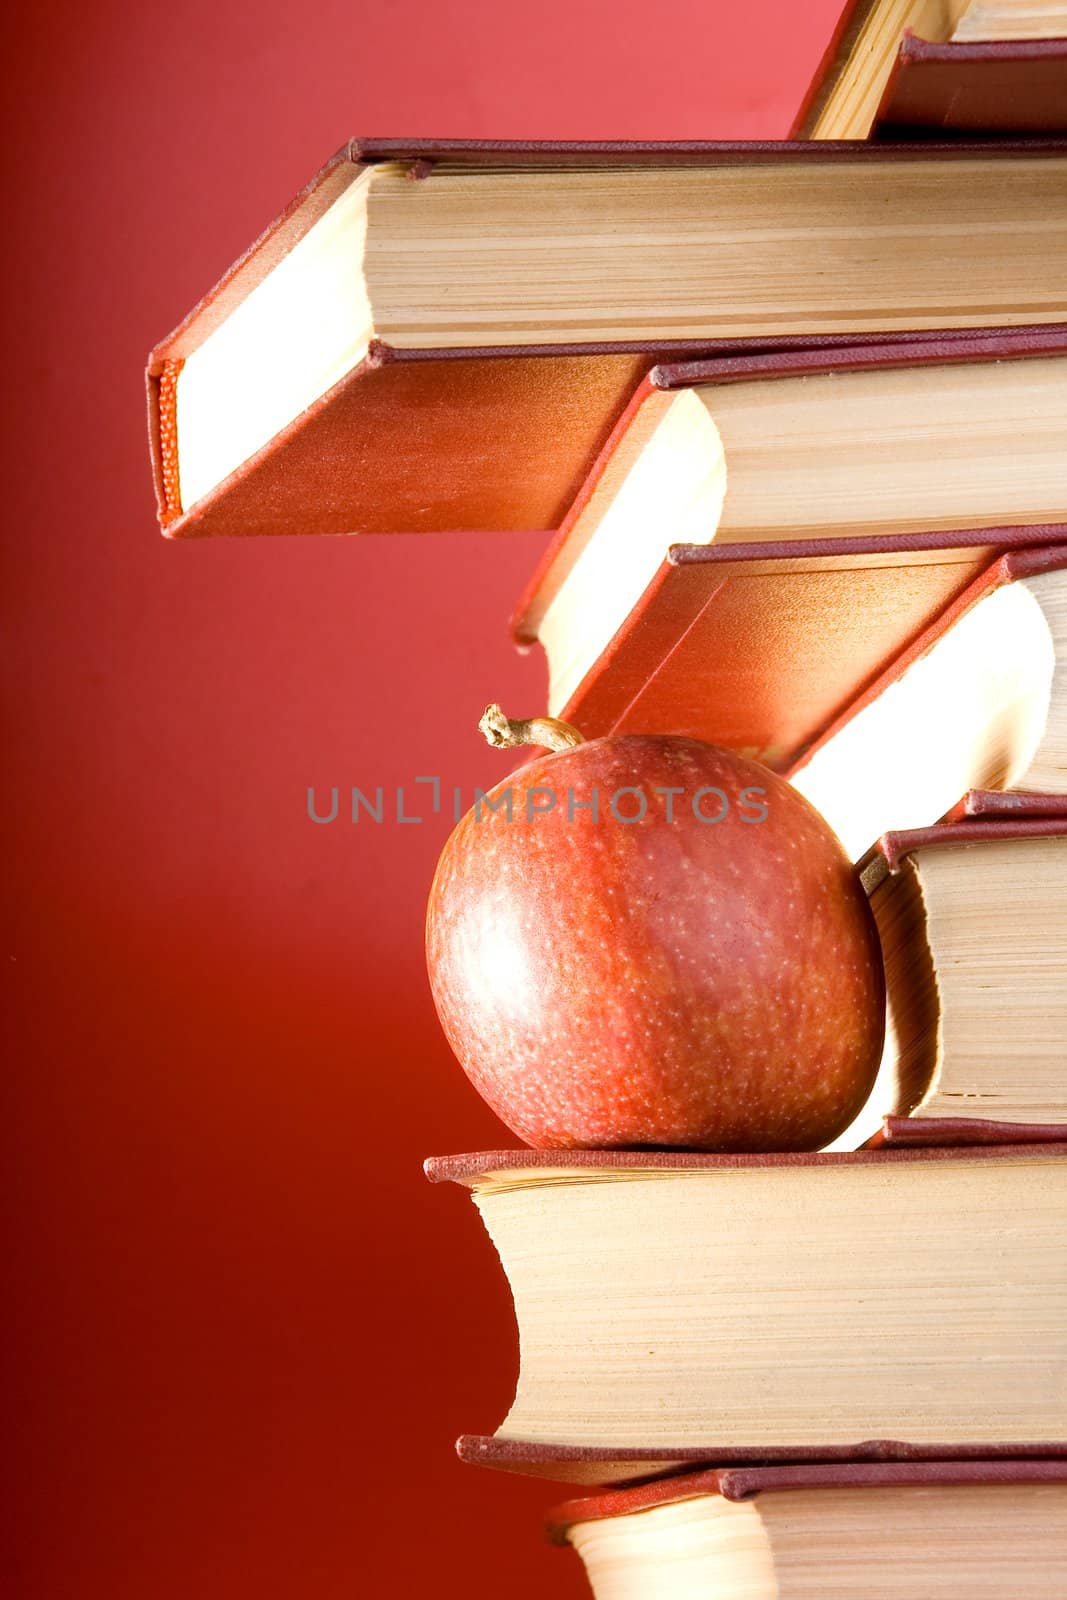 The Red Books by Vladimir